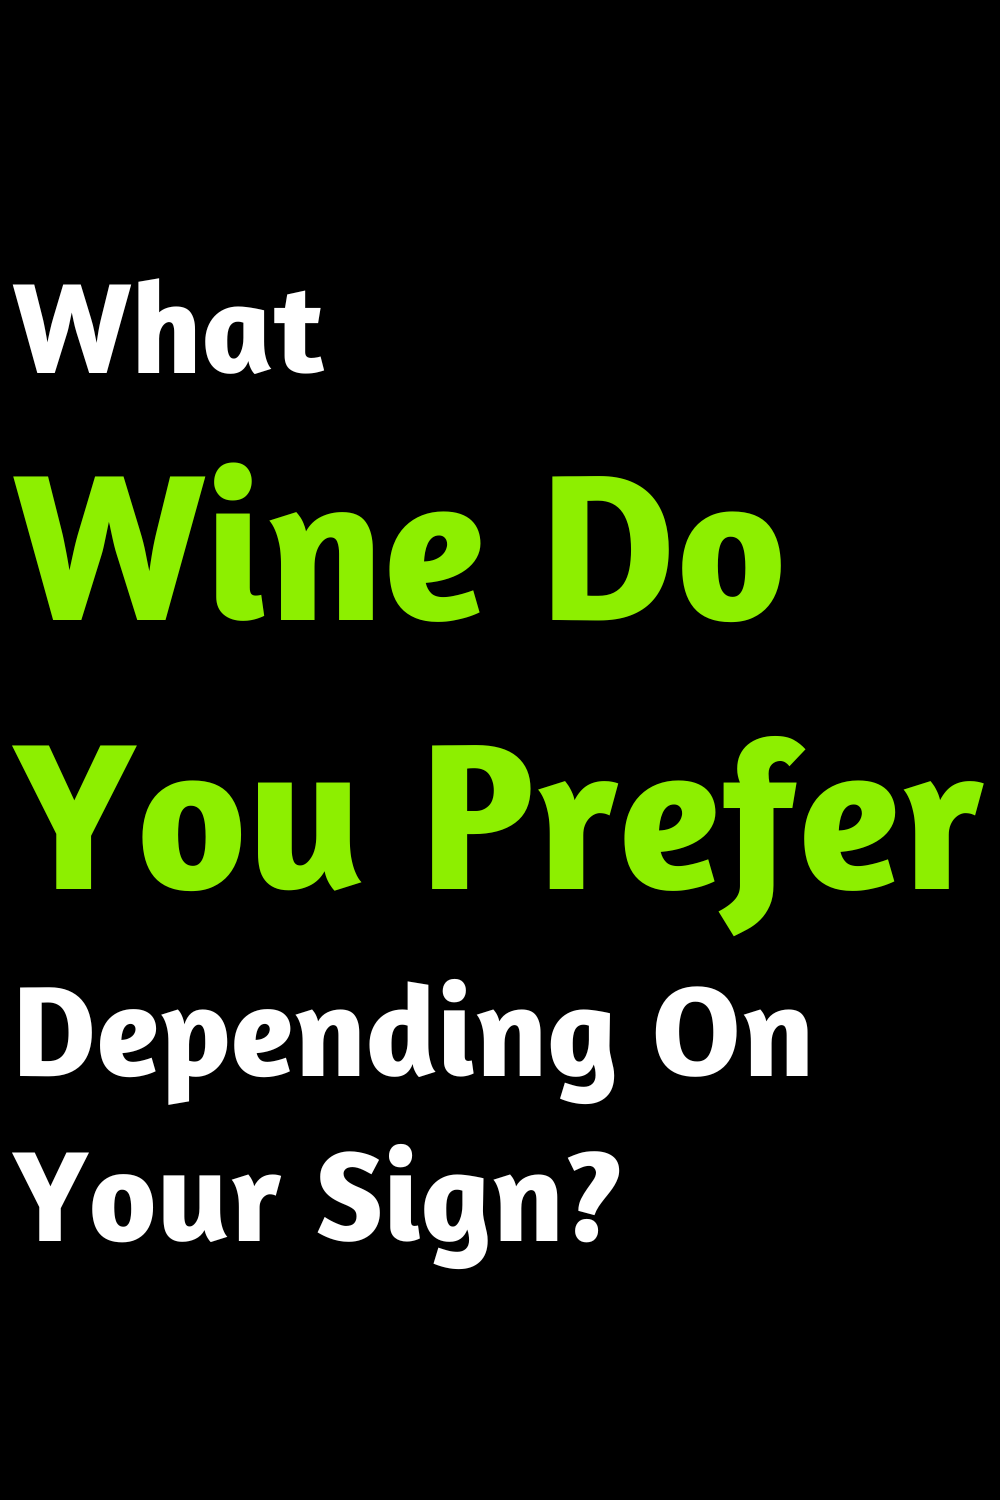 What Wine Do You Prefer Depending On Your Sign?